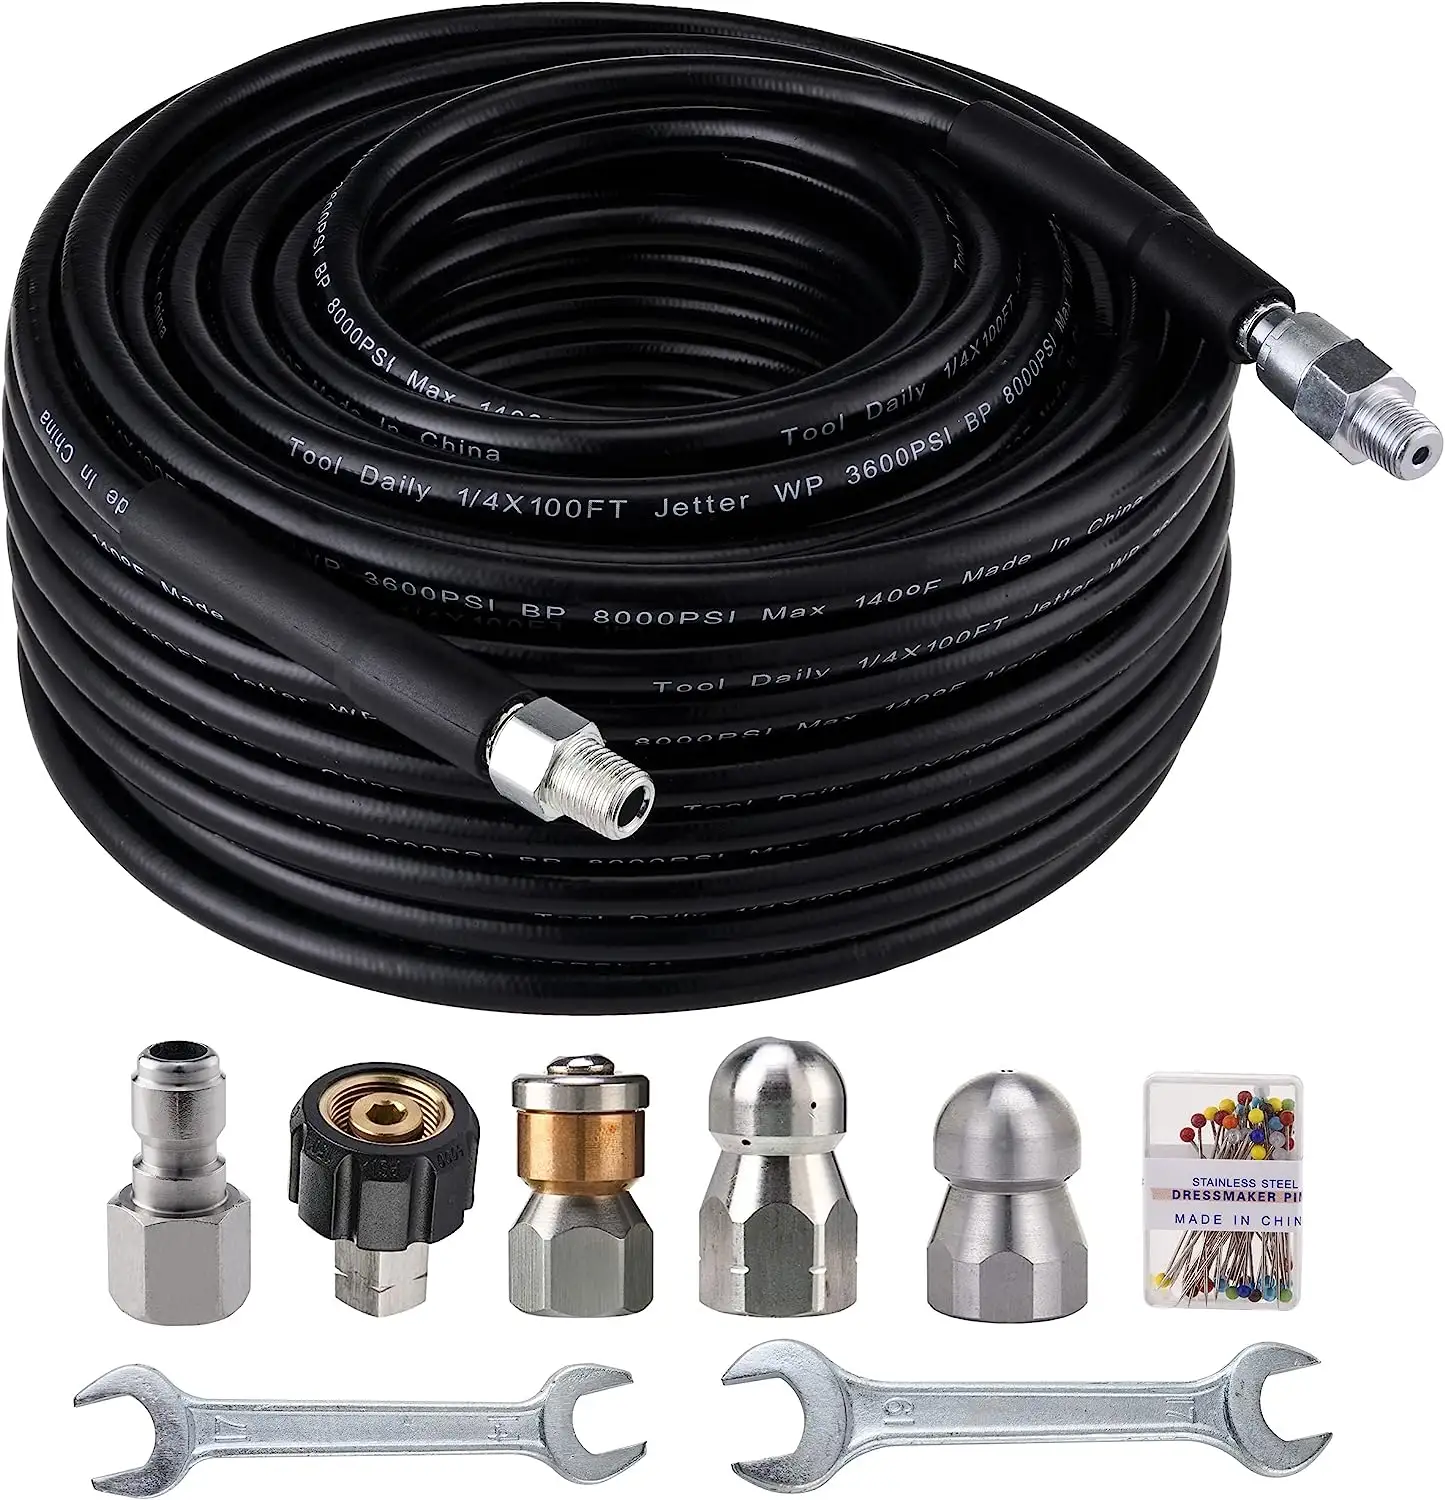 MAOJI WASHER Sewer Jetter Kit for Pressure Washer 50 Feet Hose 1/4 Inch,Drain Jetting, Laser and Rotating Sewer Nozzle,3600 PSI,